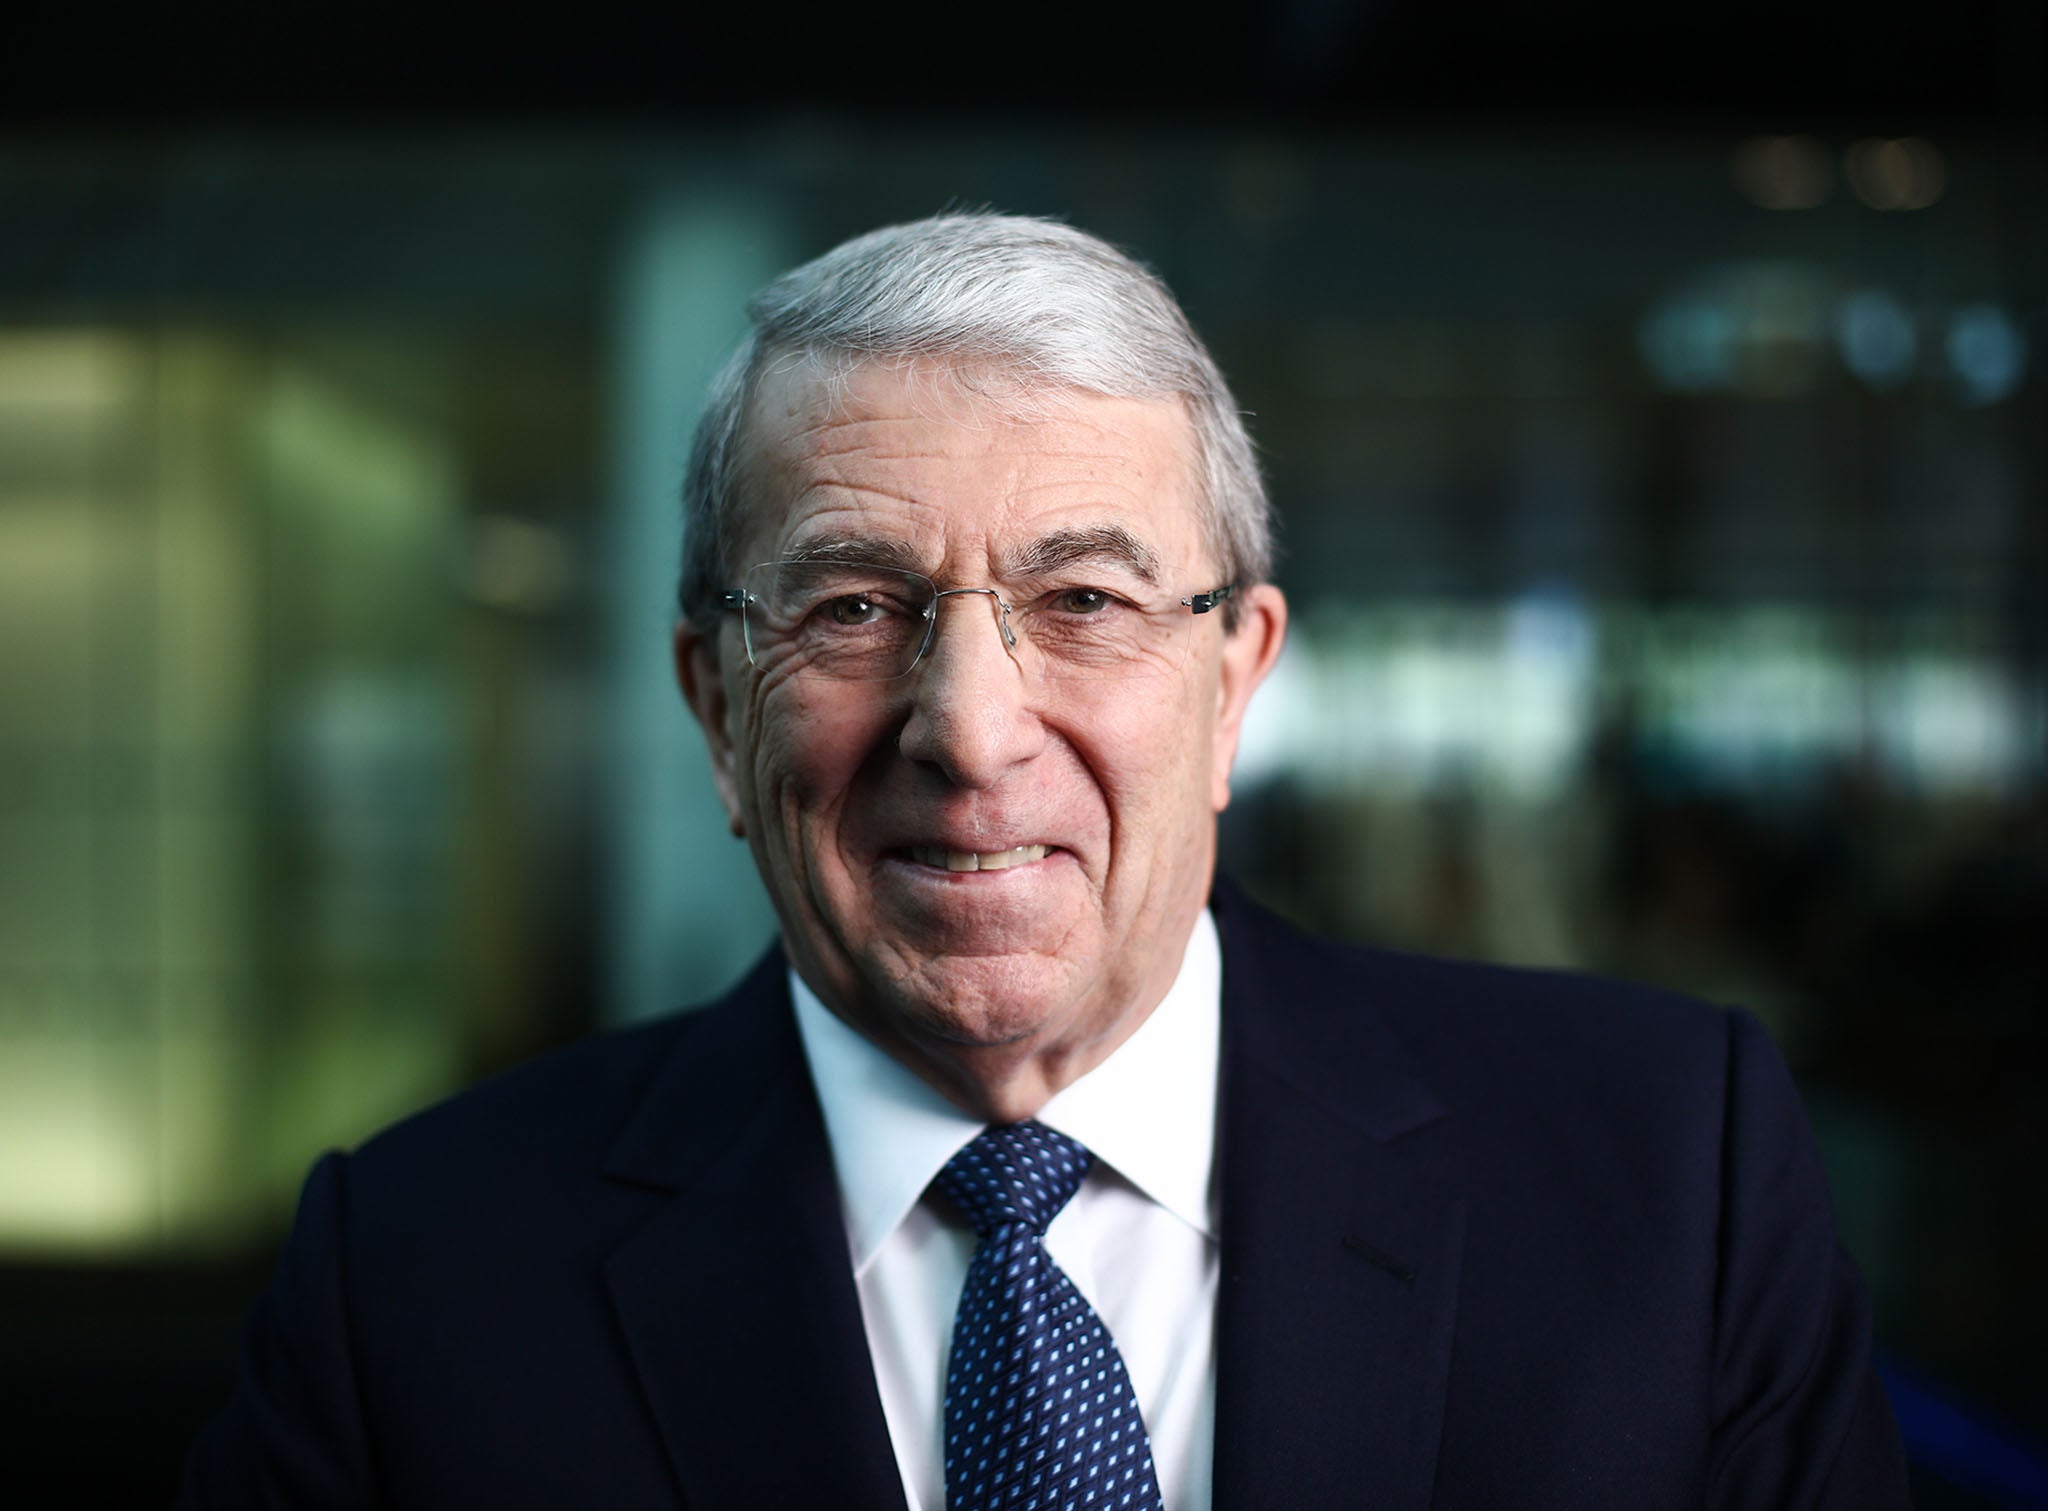 Sir Roger Carr, BAE Systems Chairman since 2014 and BBC Trust Vice Chairman since 2015